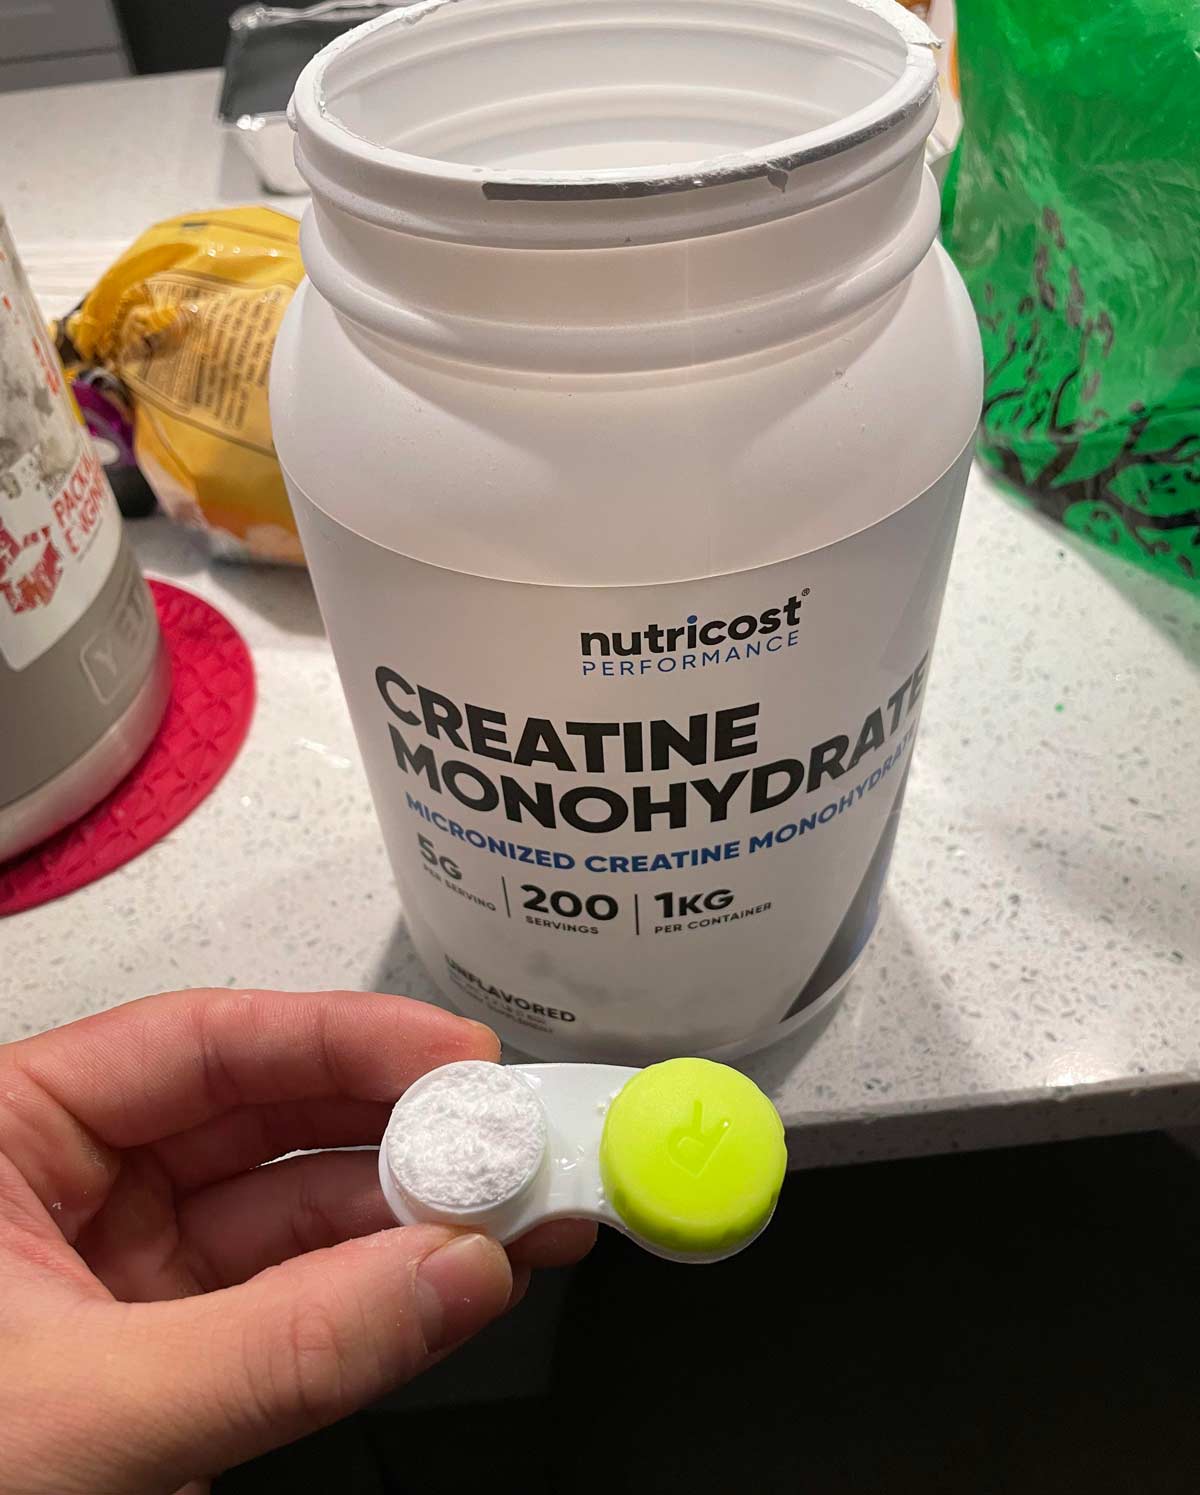 Thought of a genius way to fly with creatine powder without looking like a cocaine smuggler